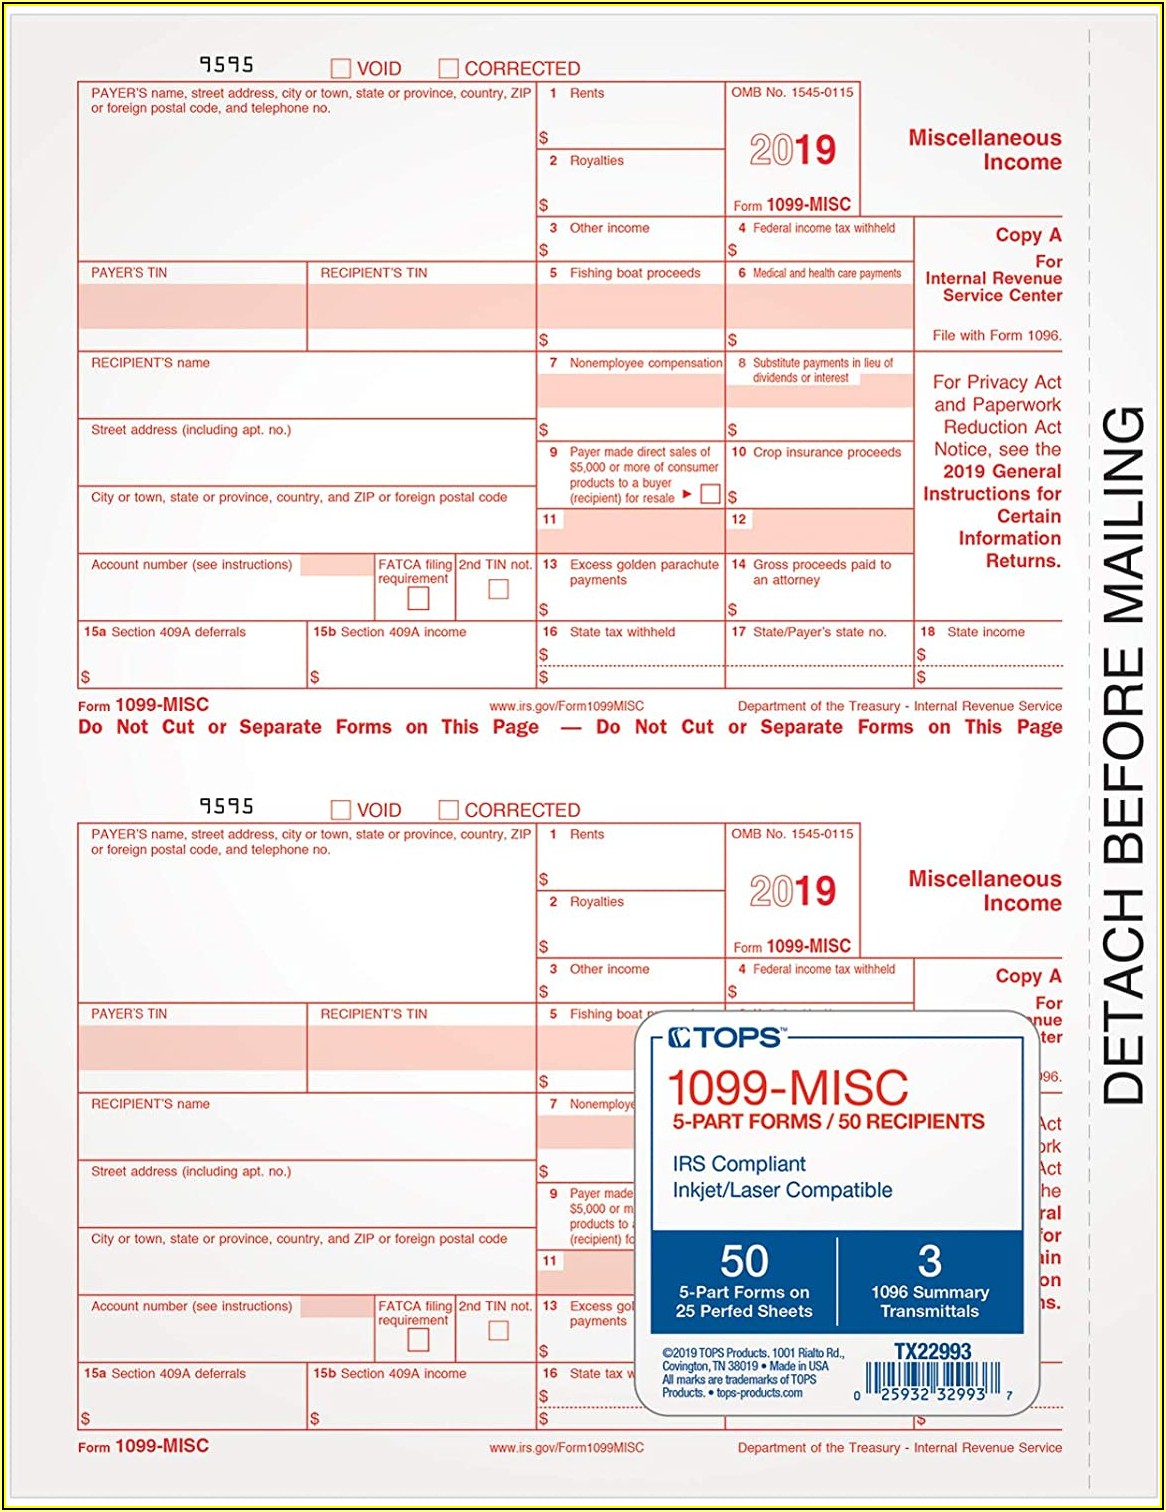 Where Can I Get 1099 Misc Tax Forms